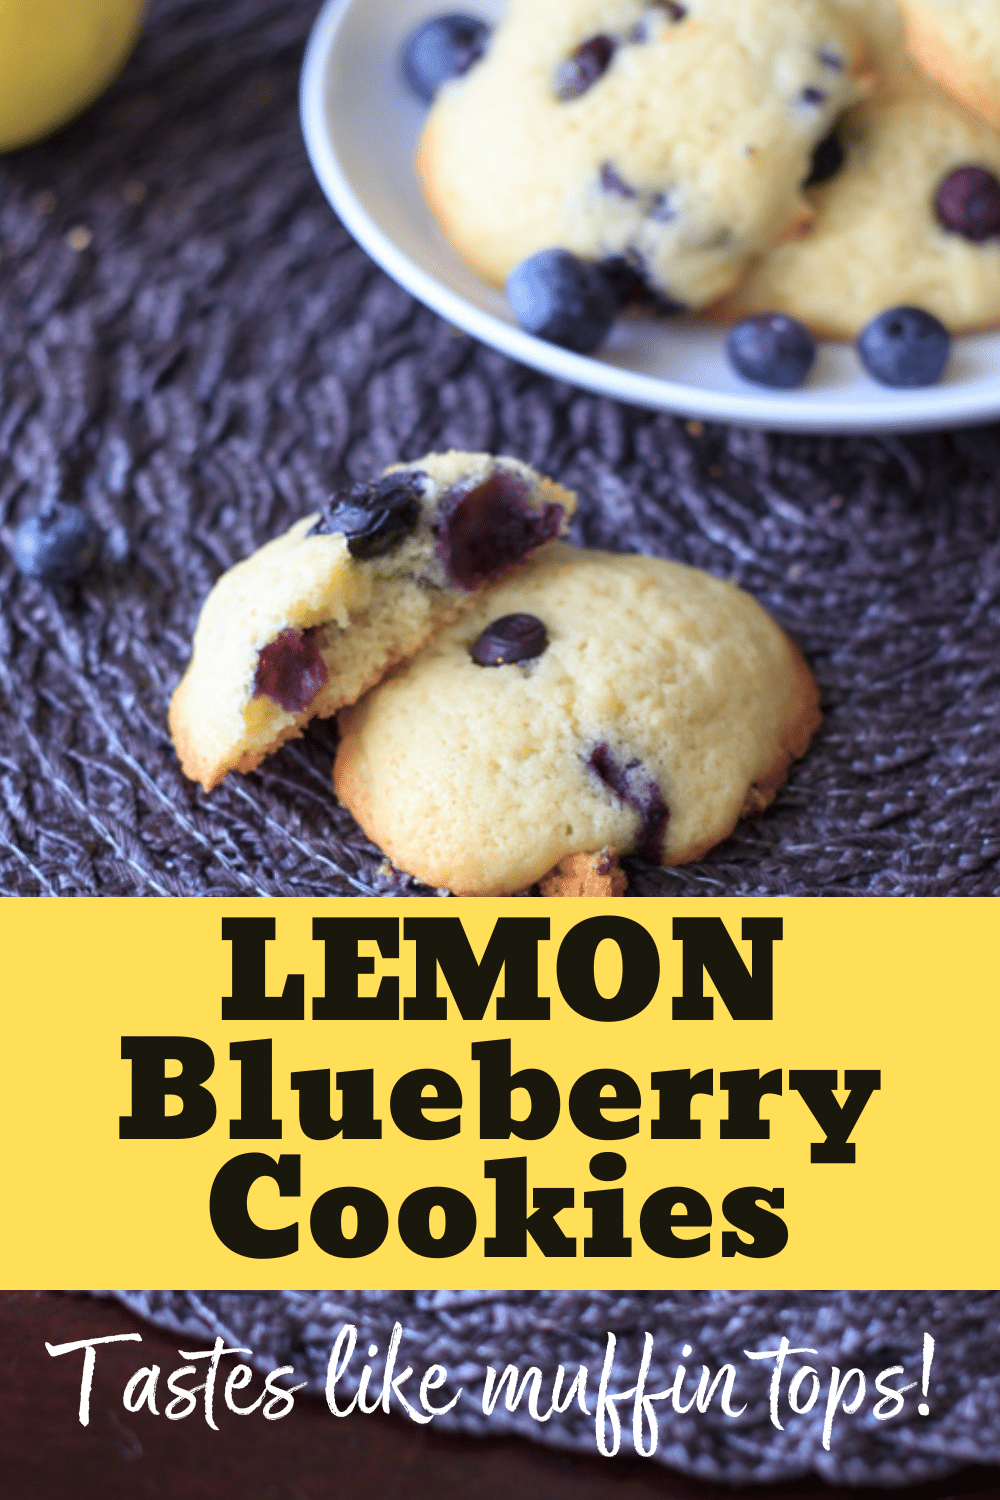 lemon blueberry cookies tastes like a muffin top!